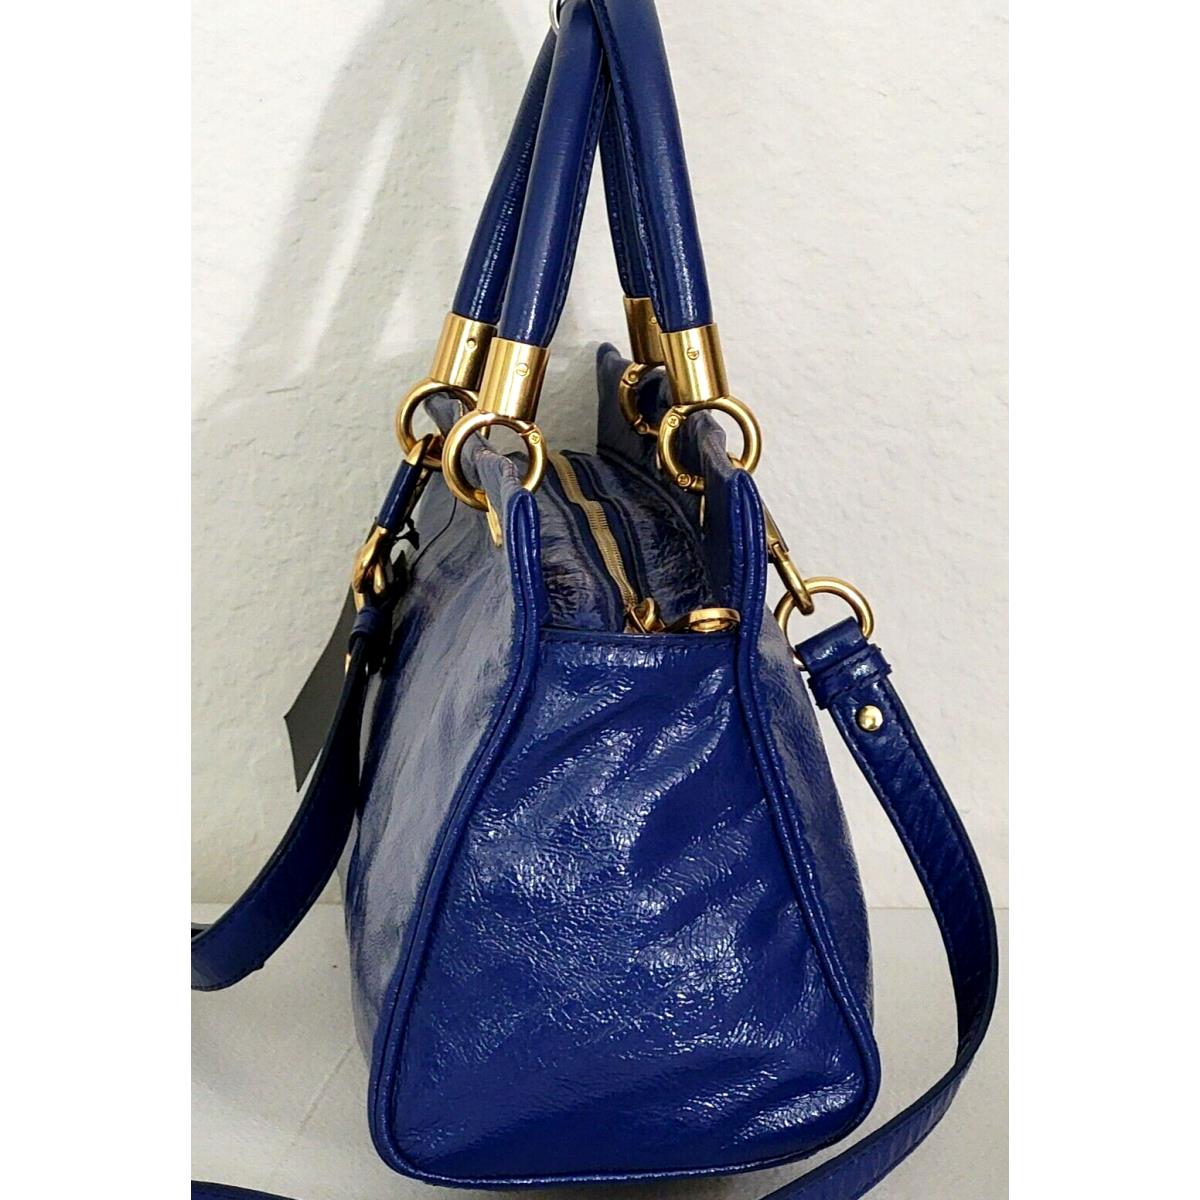 Marc Jacobs  bag  TOO HOT HANDLE - Blue Handle/Strap, Gold Hardware, BRIGHT ROYAL BLUE Exterior 5